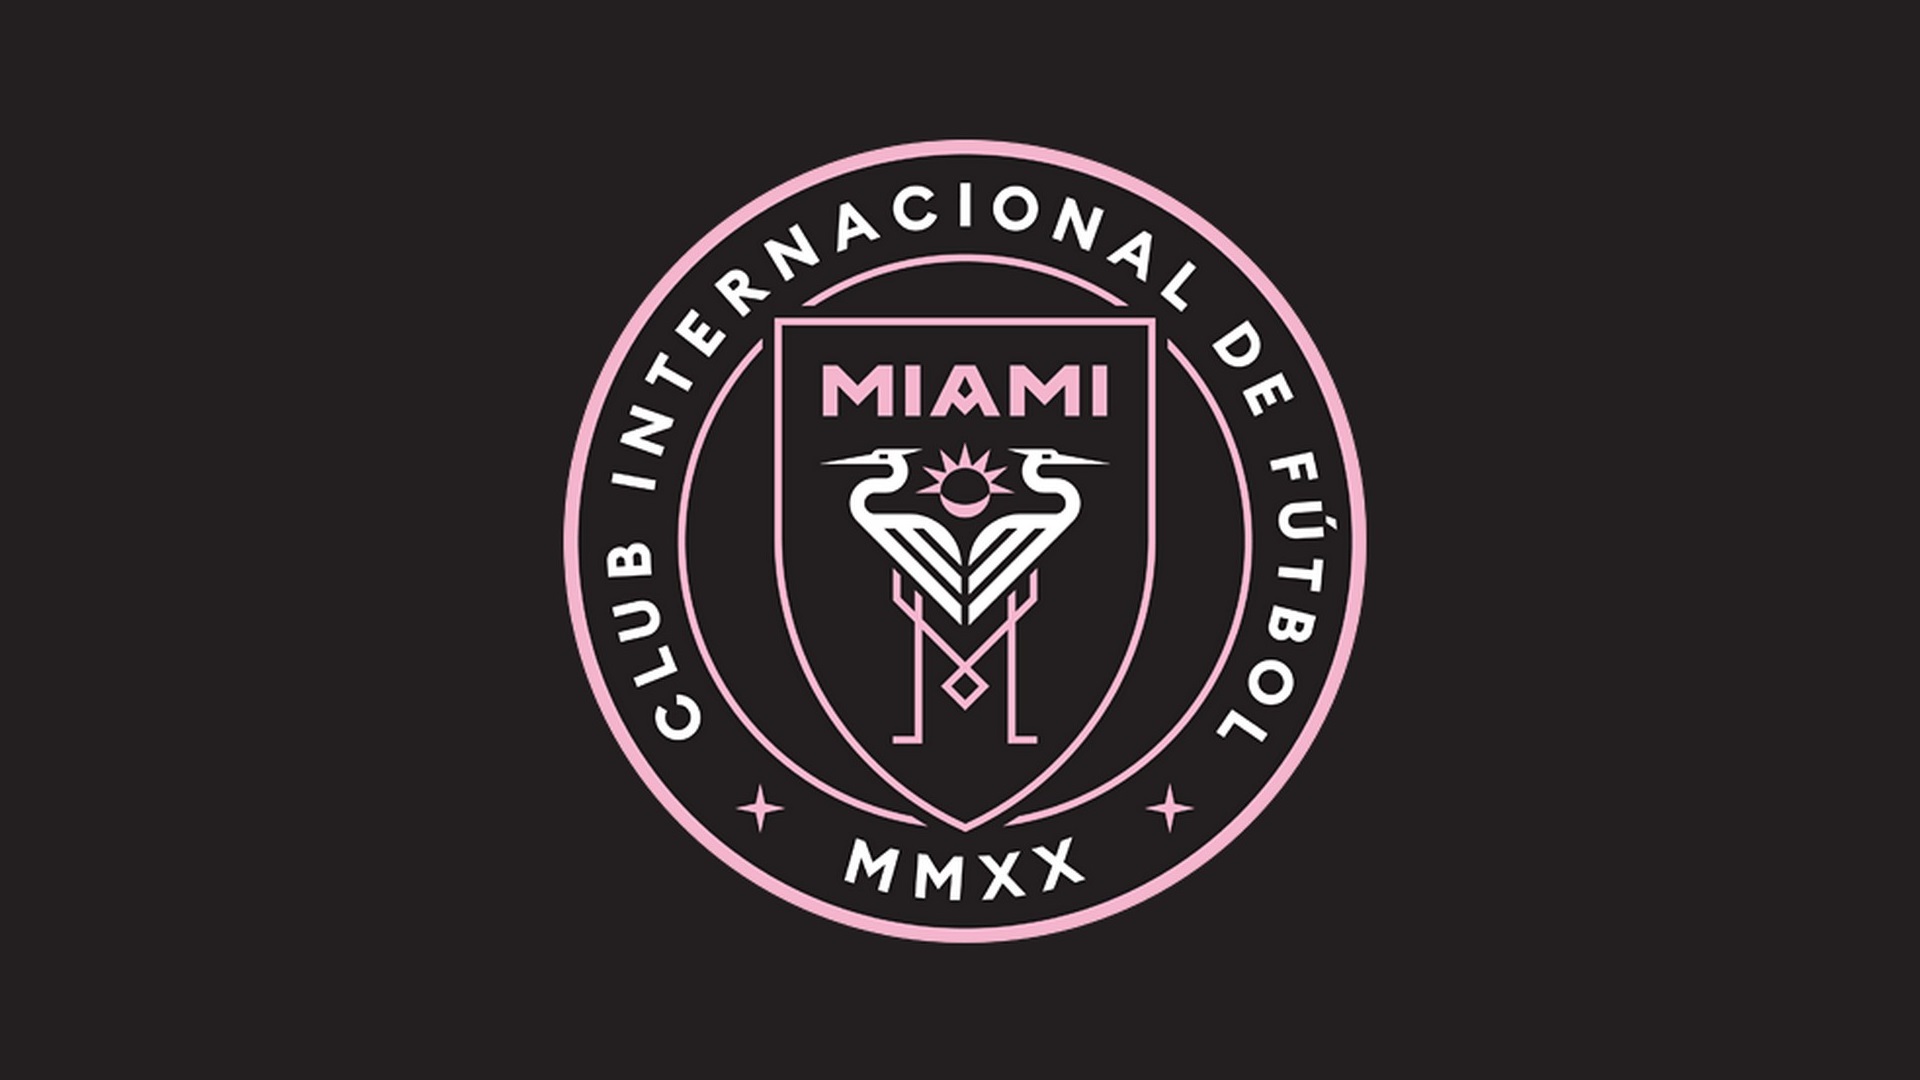 Inter Miami Wallpaper HD with high-resolution 1920x1080 pixel. You can use this wallpaper for your Desktop Computers, Mac Screensavers, Windows Backgrounds, iPhone Wallpapers, Tablet or Android Lock screen and another Mobile device